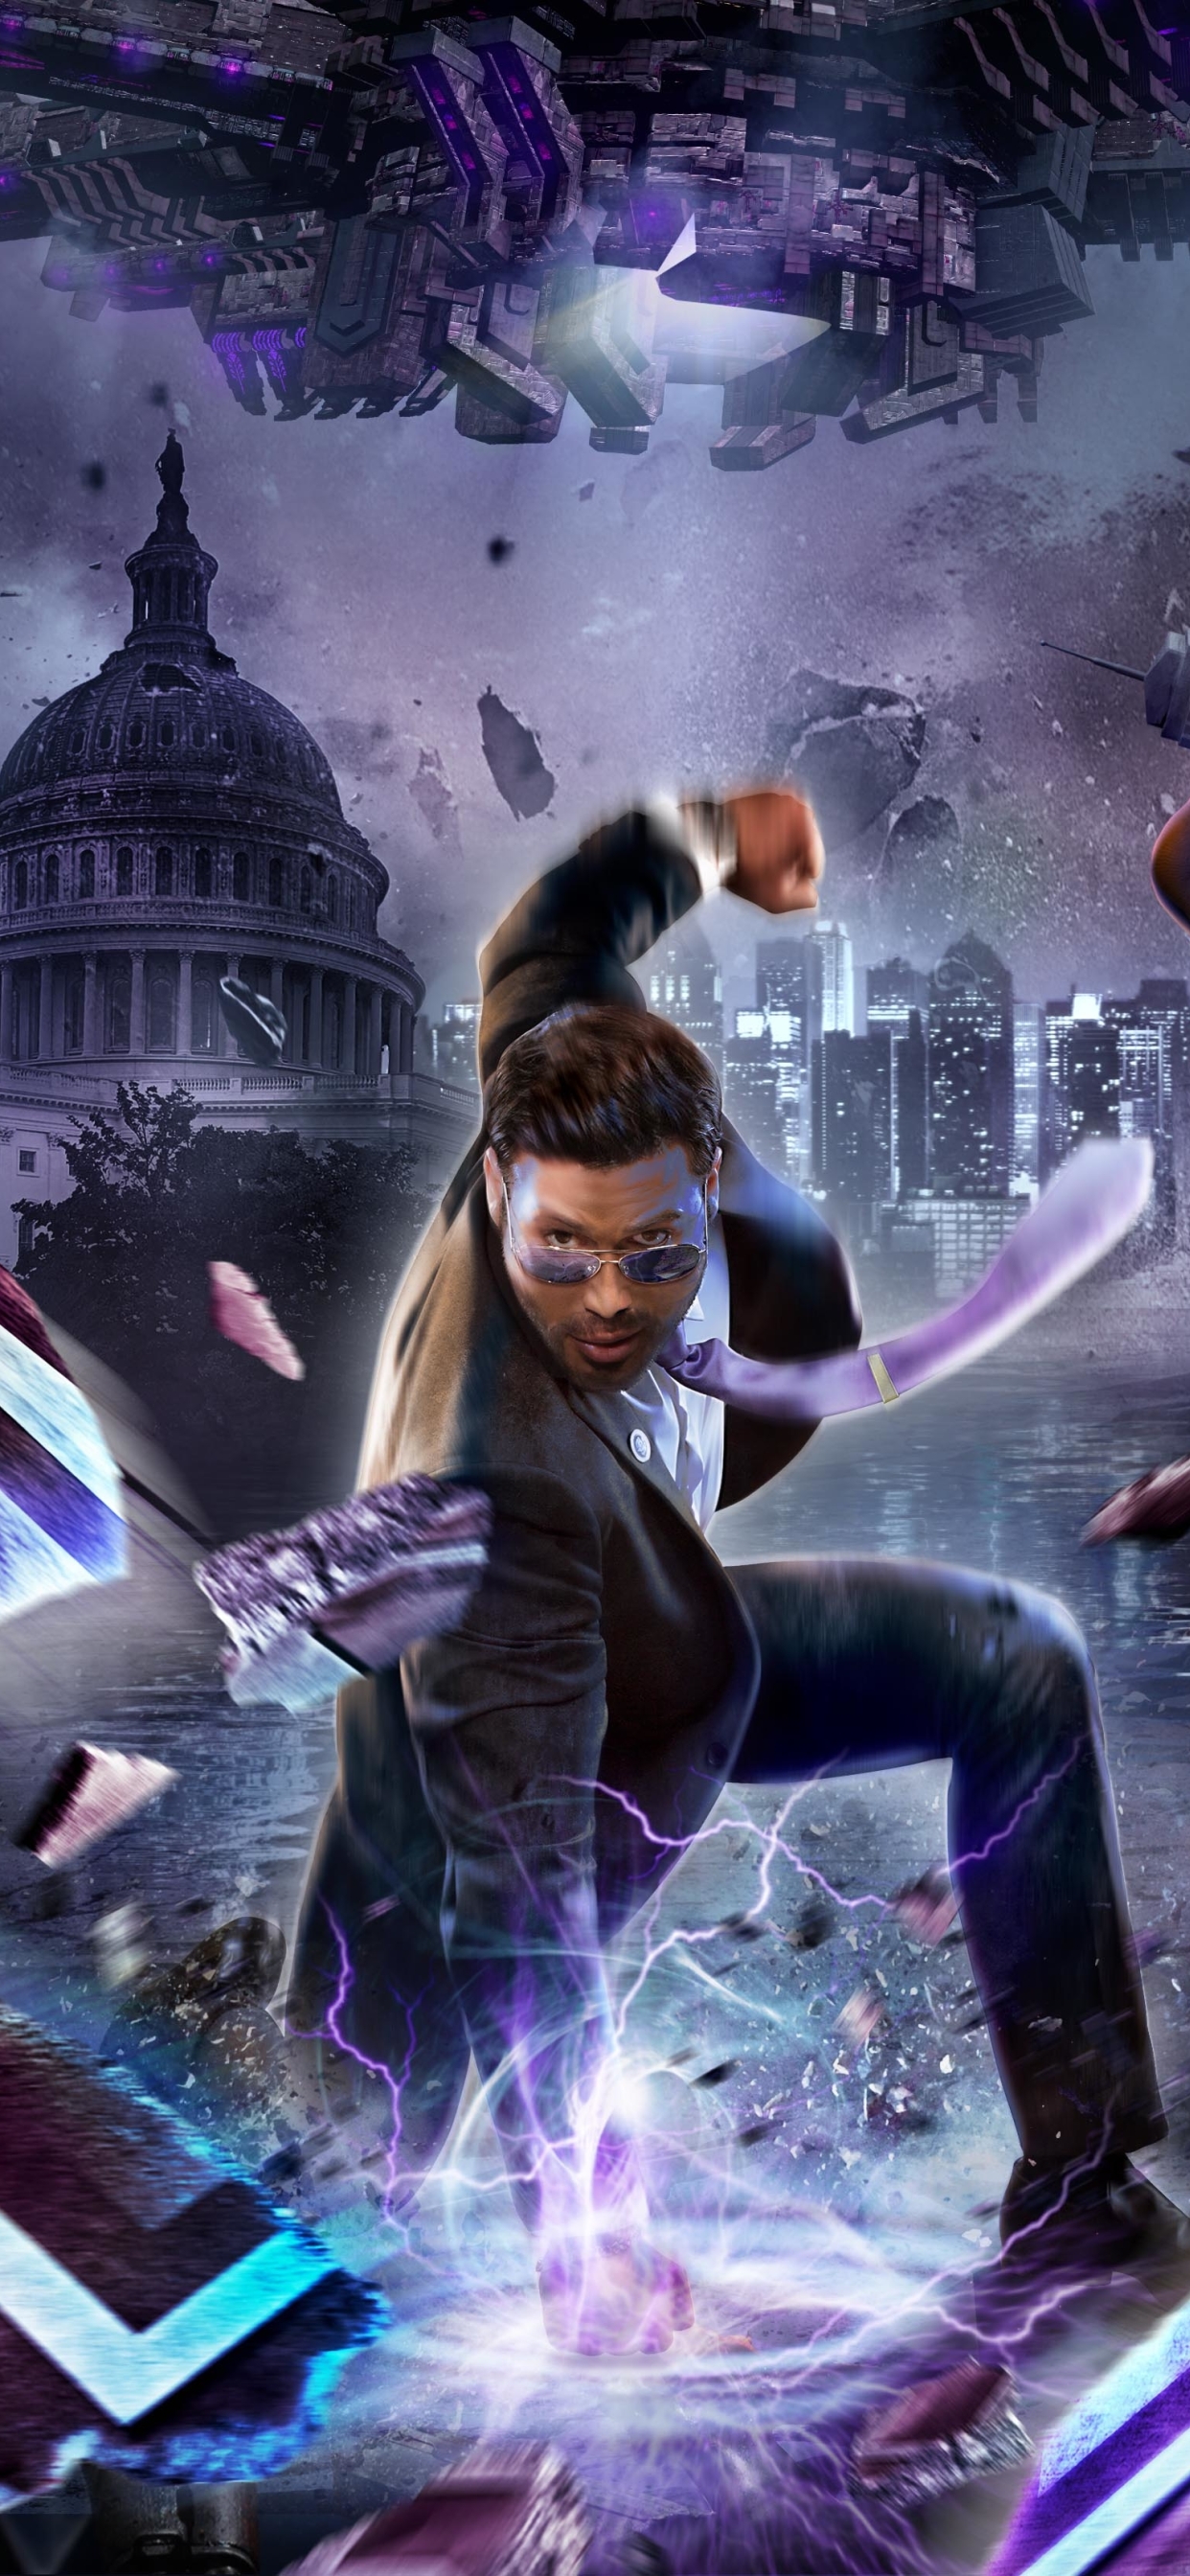 free download saints row 4 re elected